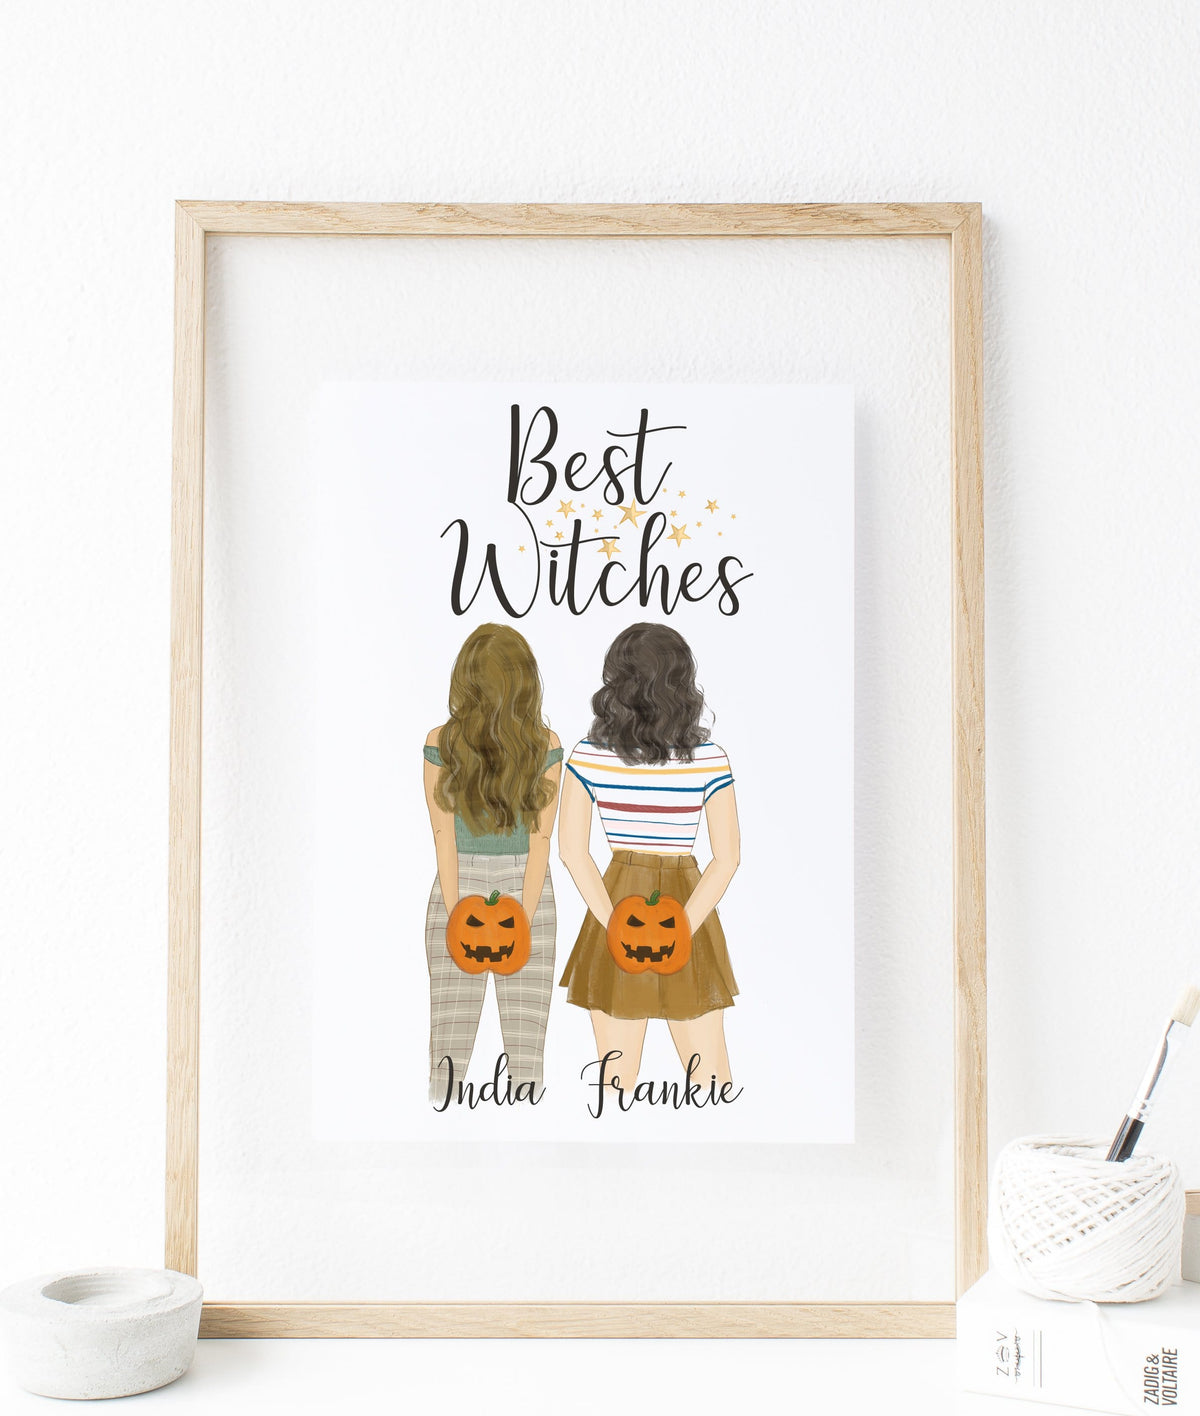 Give an amazing wall art to your best friend this Christmas — Glacelis